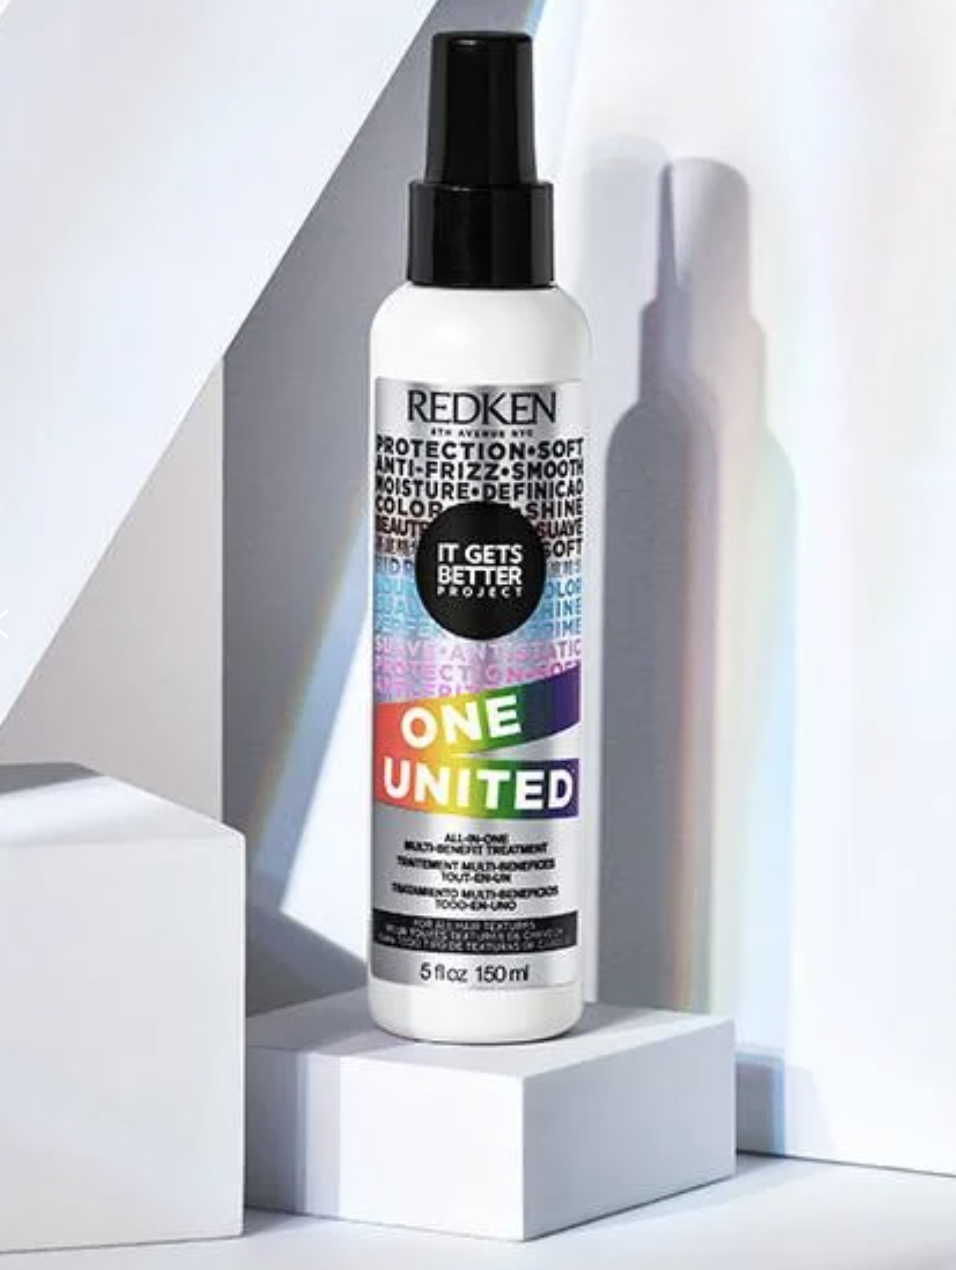 Redken One United Special Edition